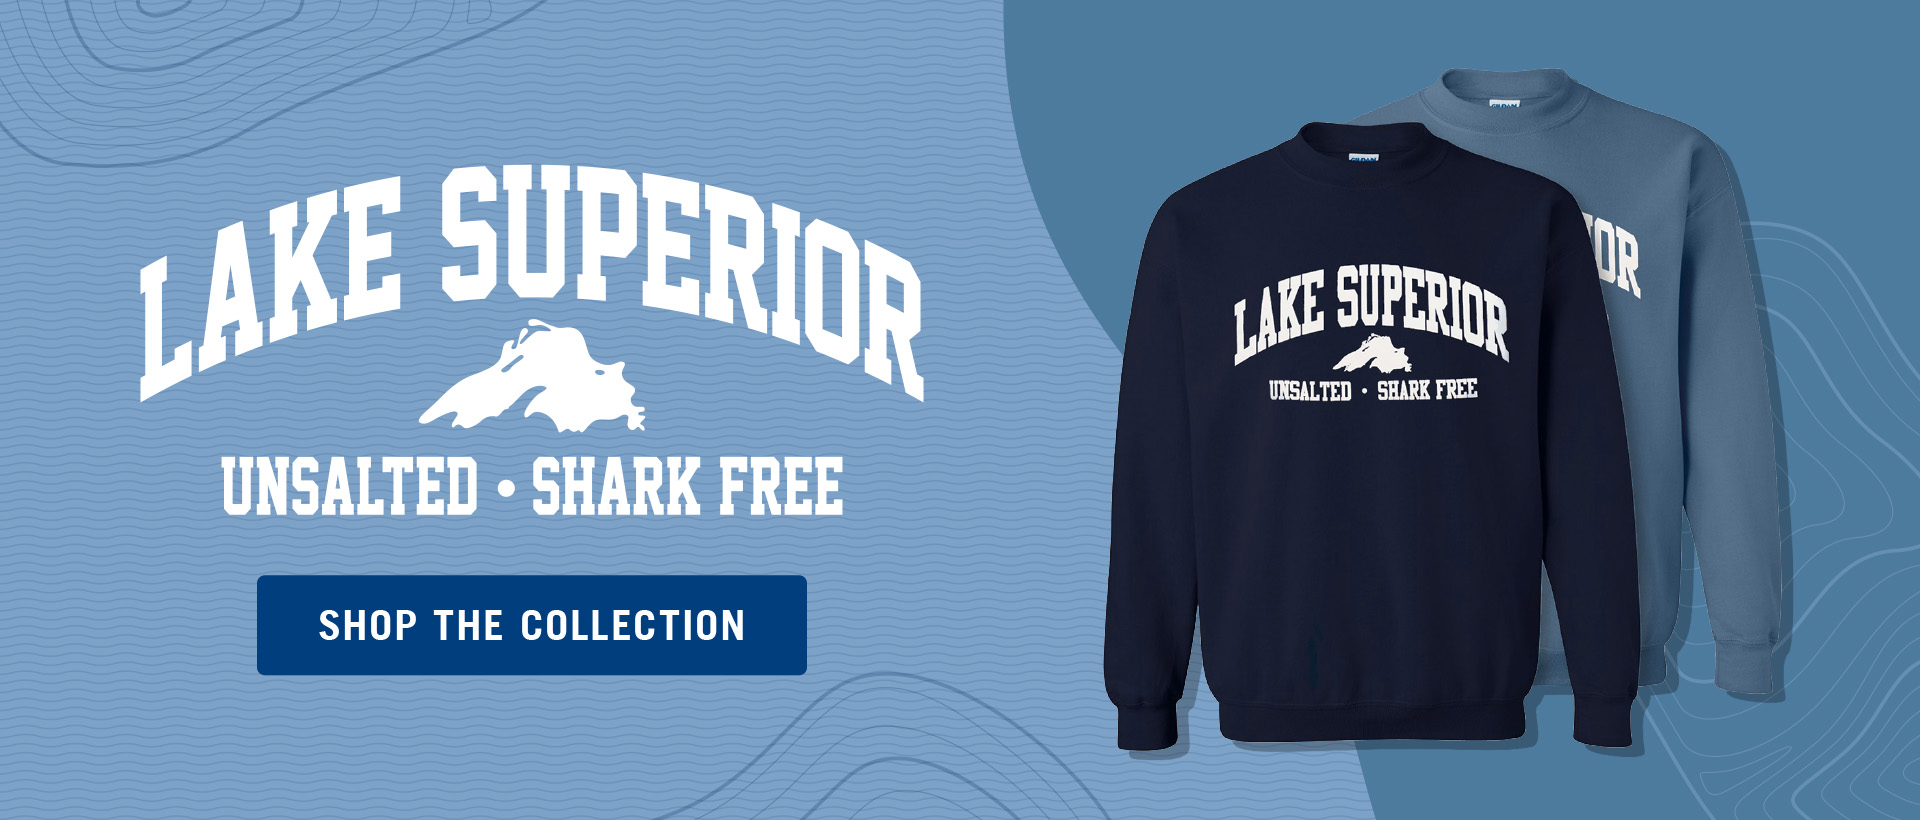 Two sweatshirts, light blue and dark blue, that say "Lake Superior" in bold white font. Light blue background.